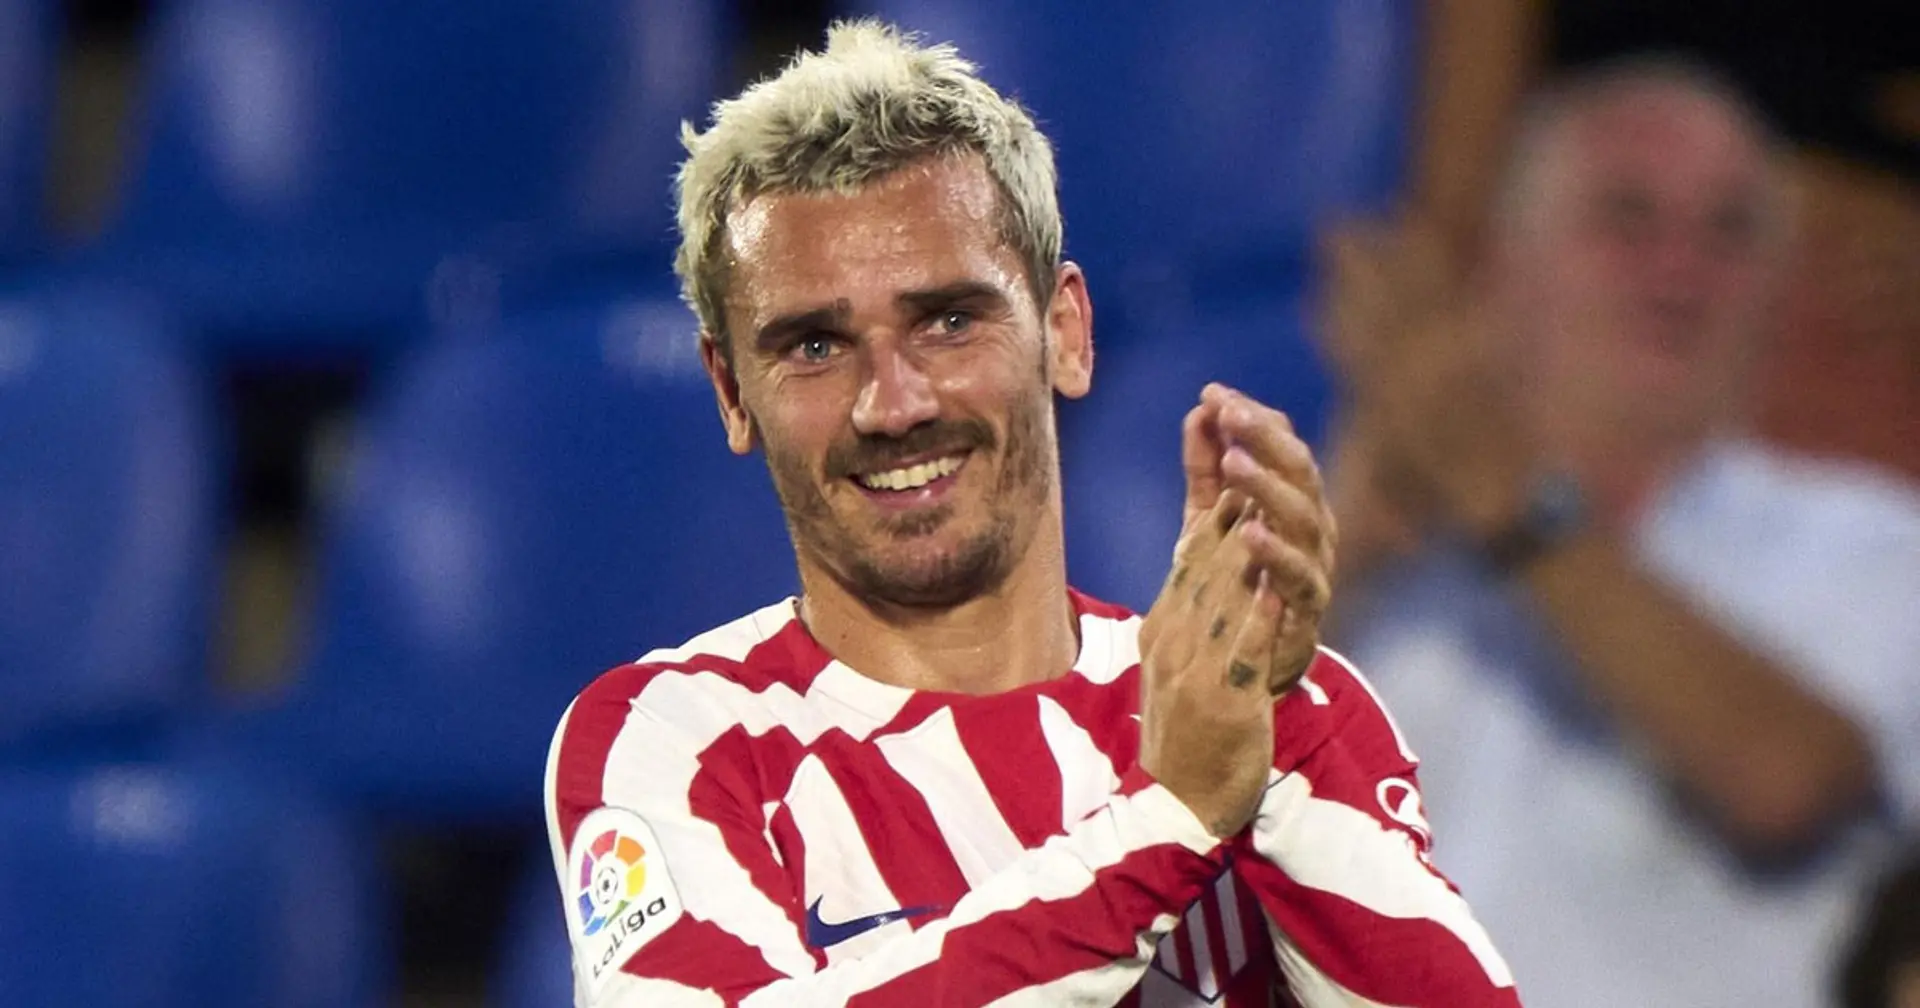 Griezmann scores first league goal in almost 9 months